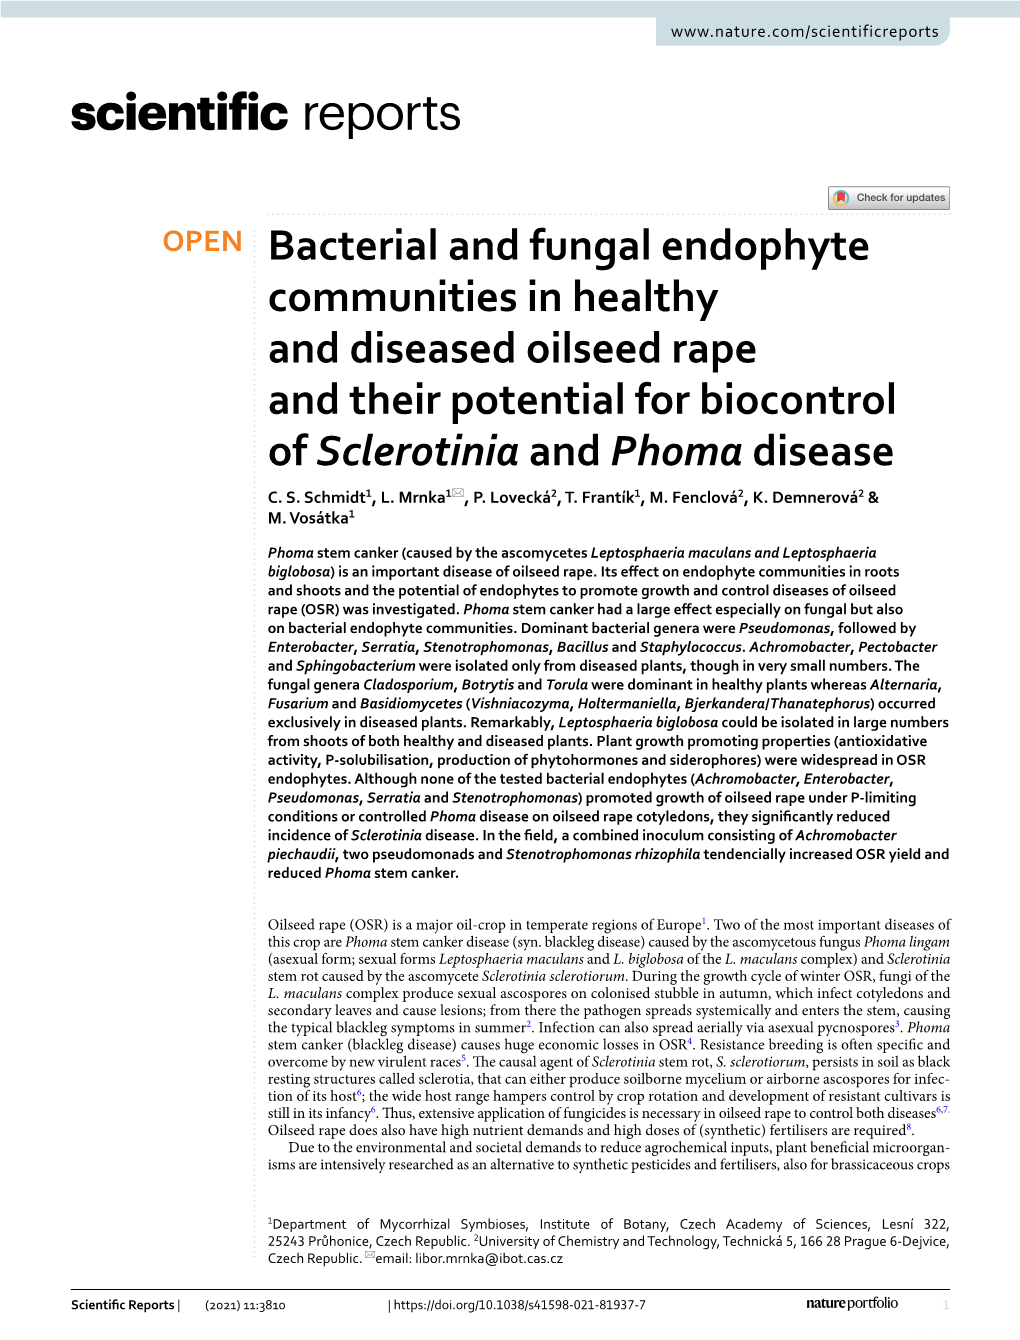 Bacterial and Fungal Endophyte Communities in Healthy and Diseased Oilseed Rape and Their Potential for Biocontrol of Sclerotinia and Phoma Disease C